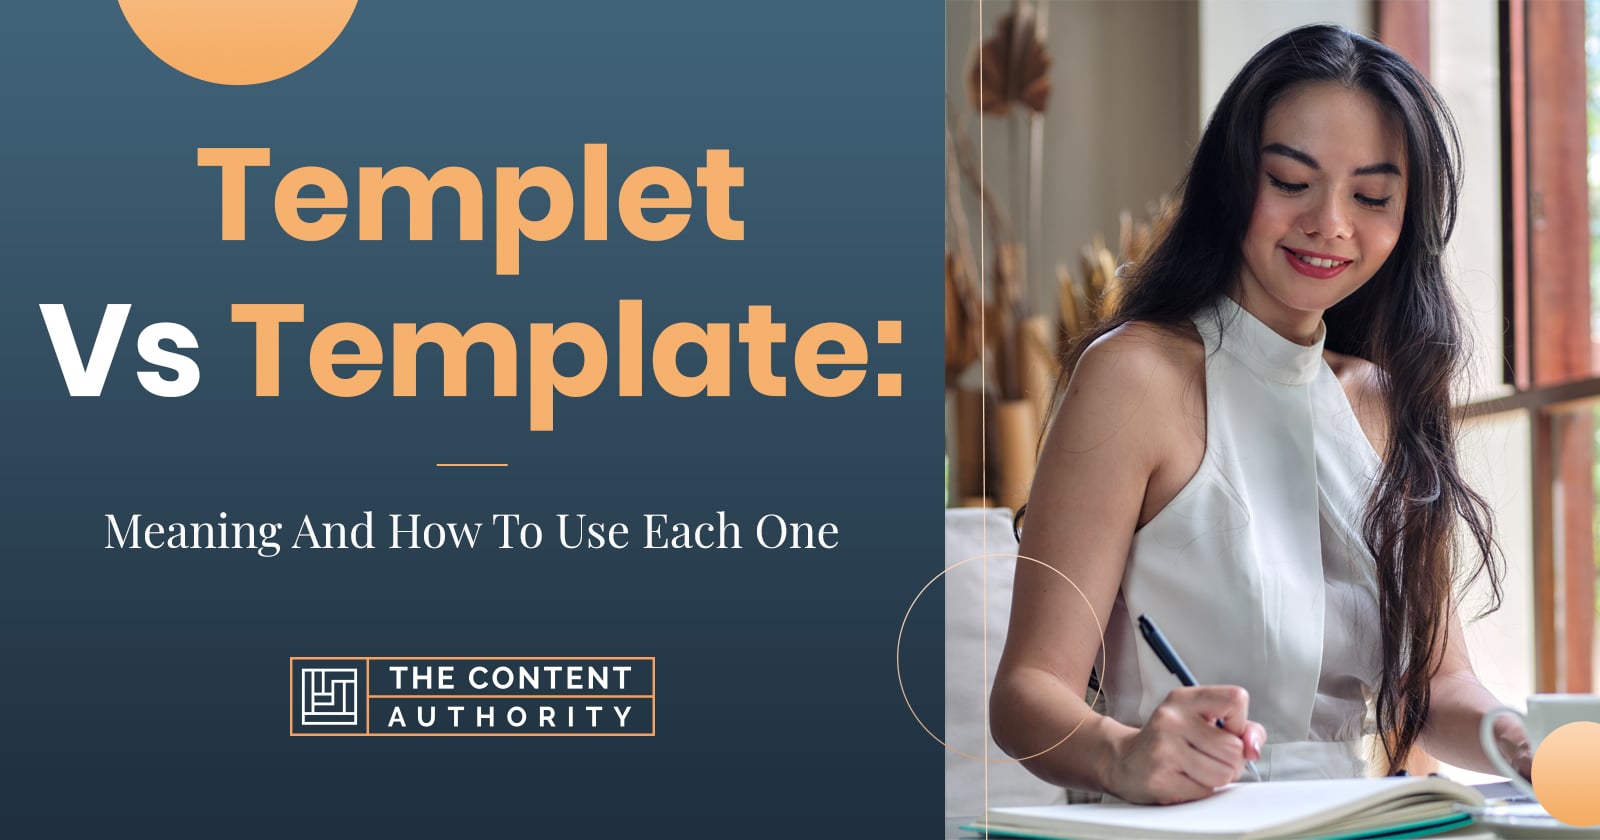 templet-vs-template-meaning-and-how-to-use-each-one